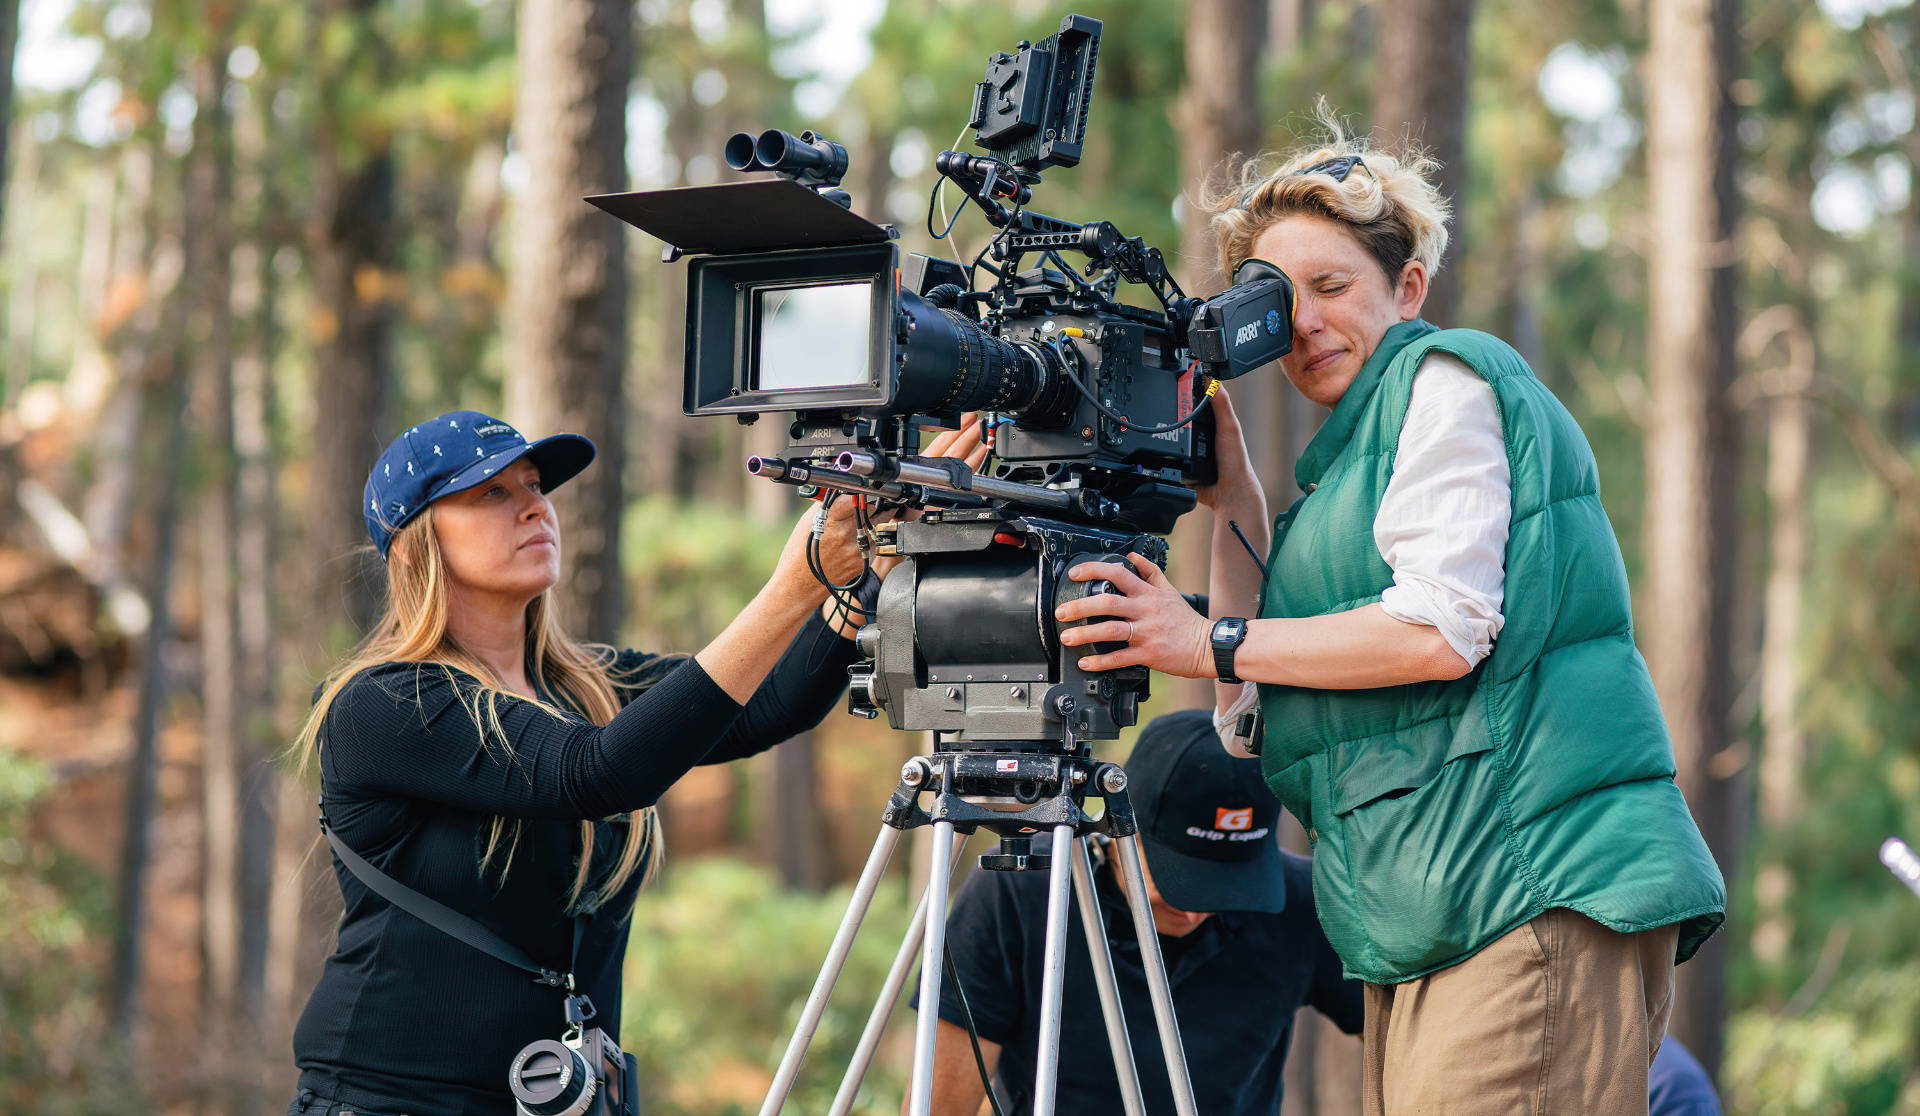 Arri Alexa 35  Upgrade of the Decade to Hollywood's Favorite